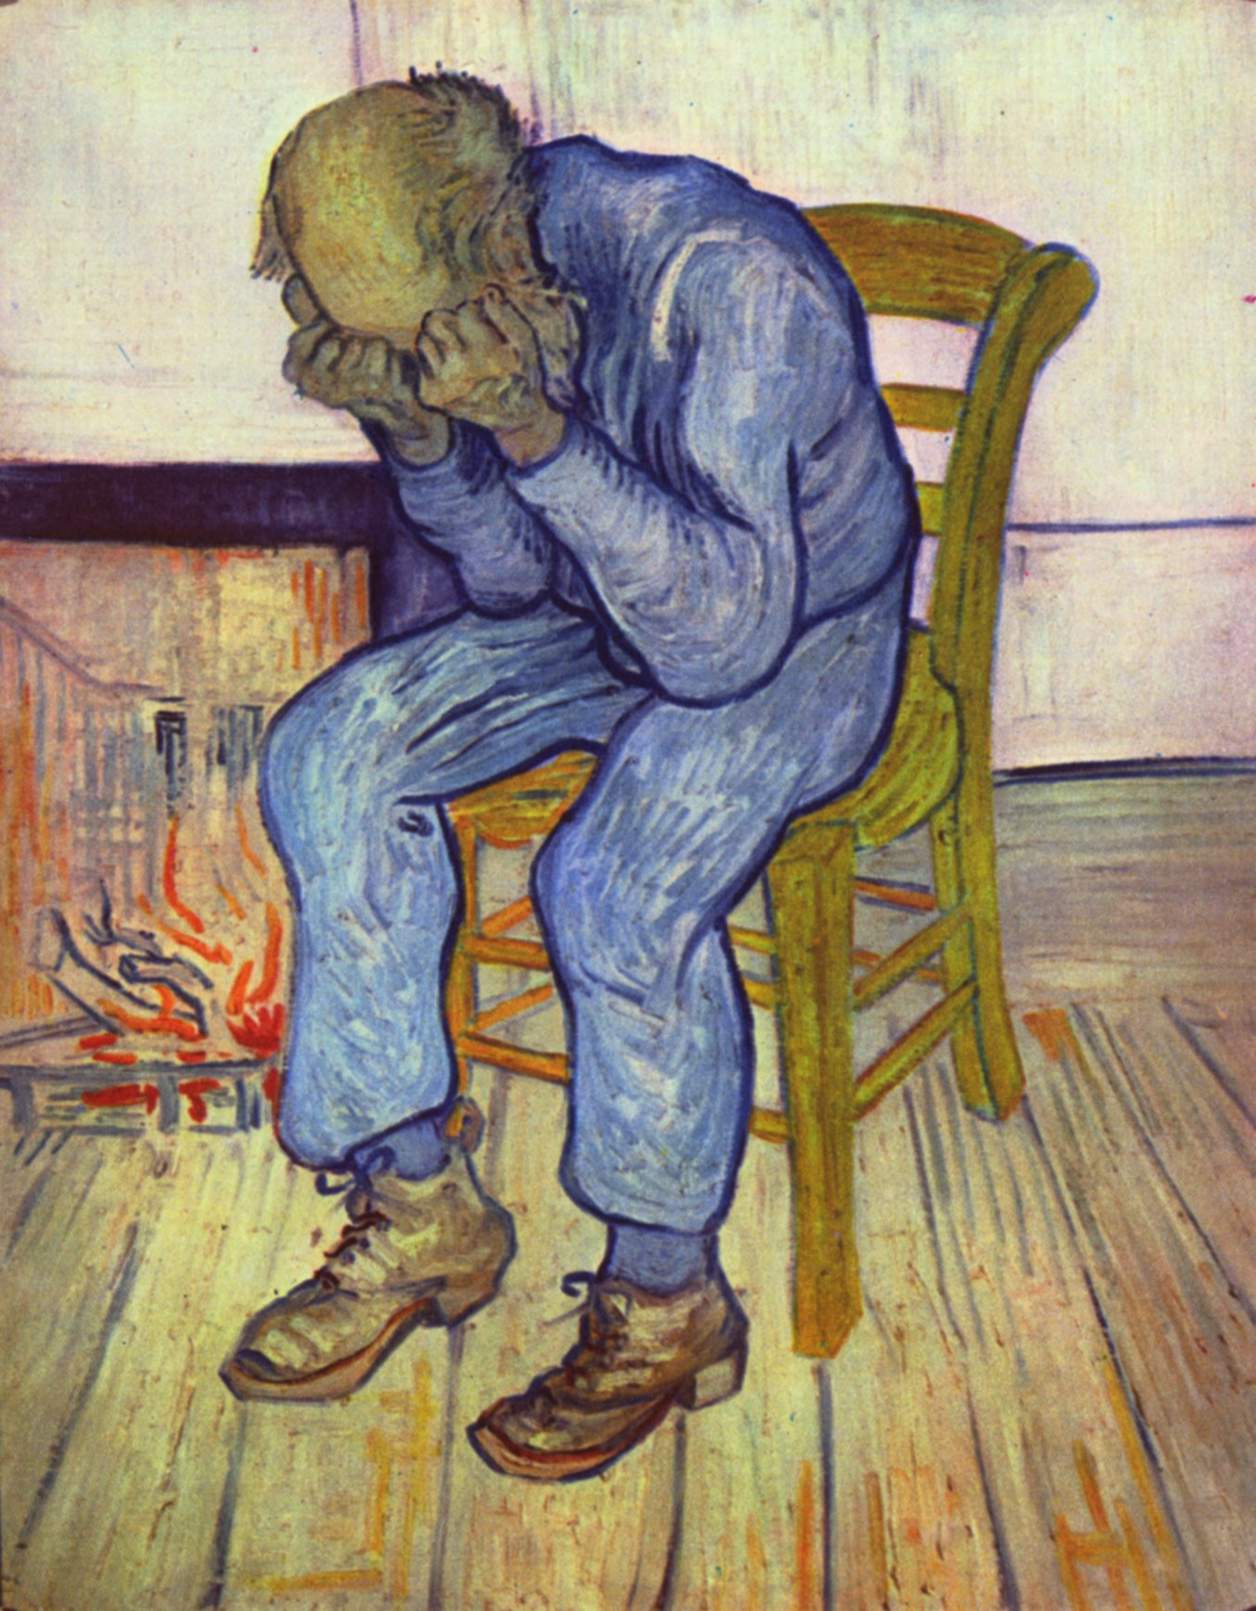 “By placing an order via this web site on the first day of the fourth month of the year 02010 Anno Domini, you agree to grant Us a non transferable option to claim, for now and for ever more, your immortal soul.” (painting: Dark Night of the Soul by Vincent van Gogh)